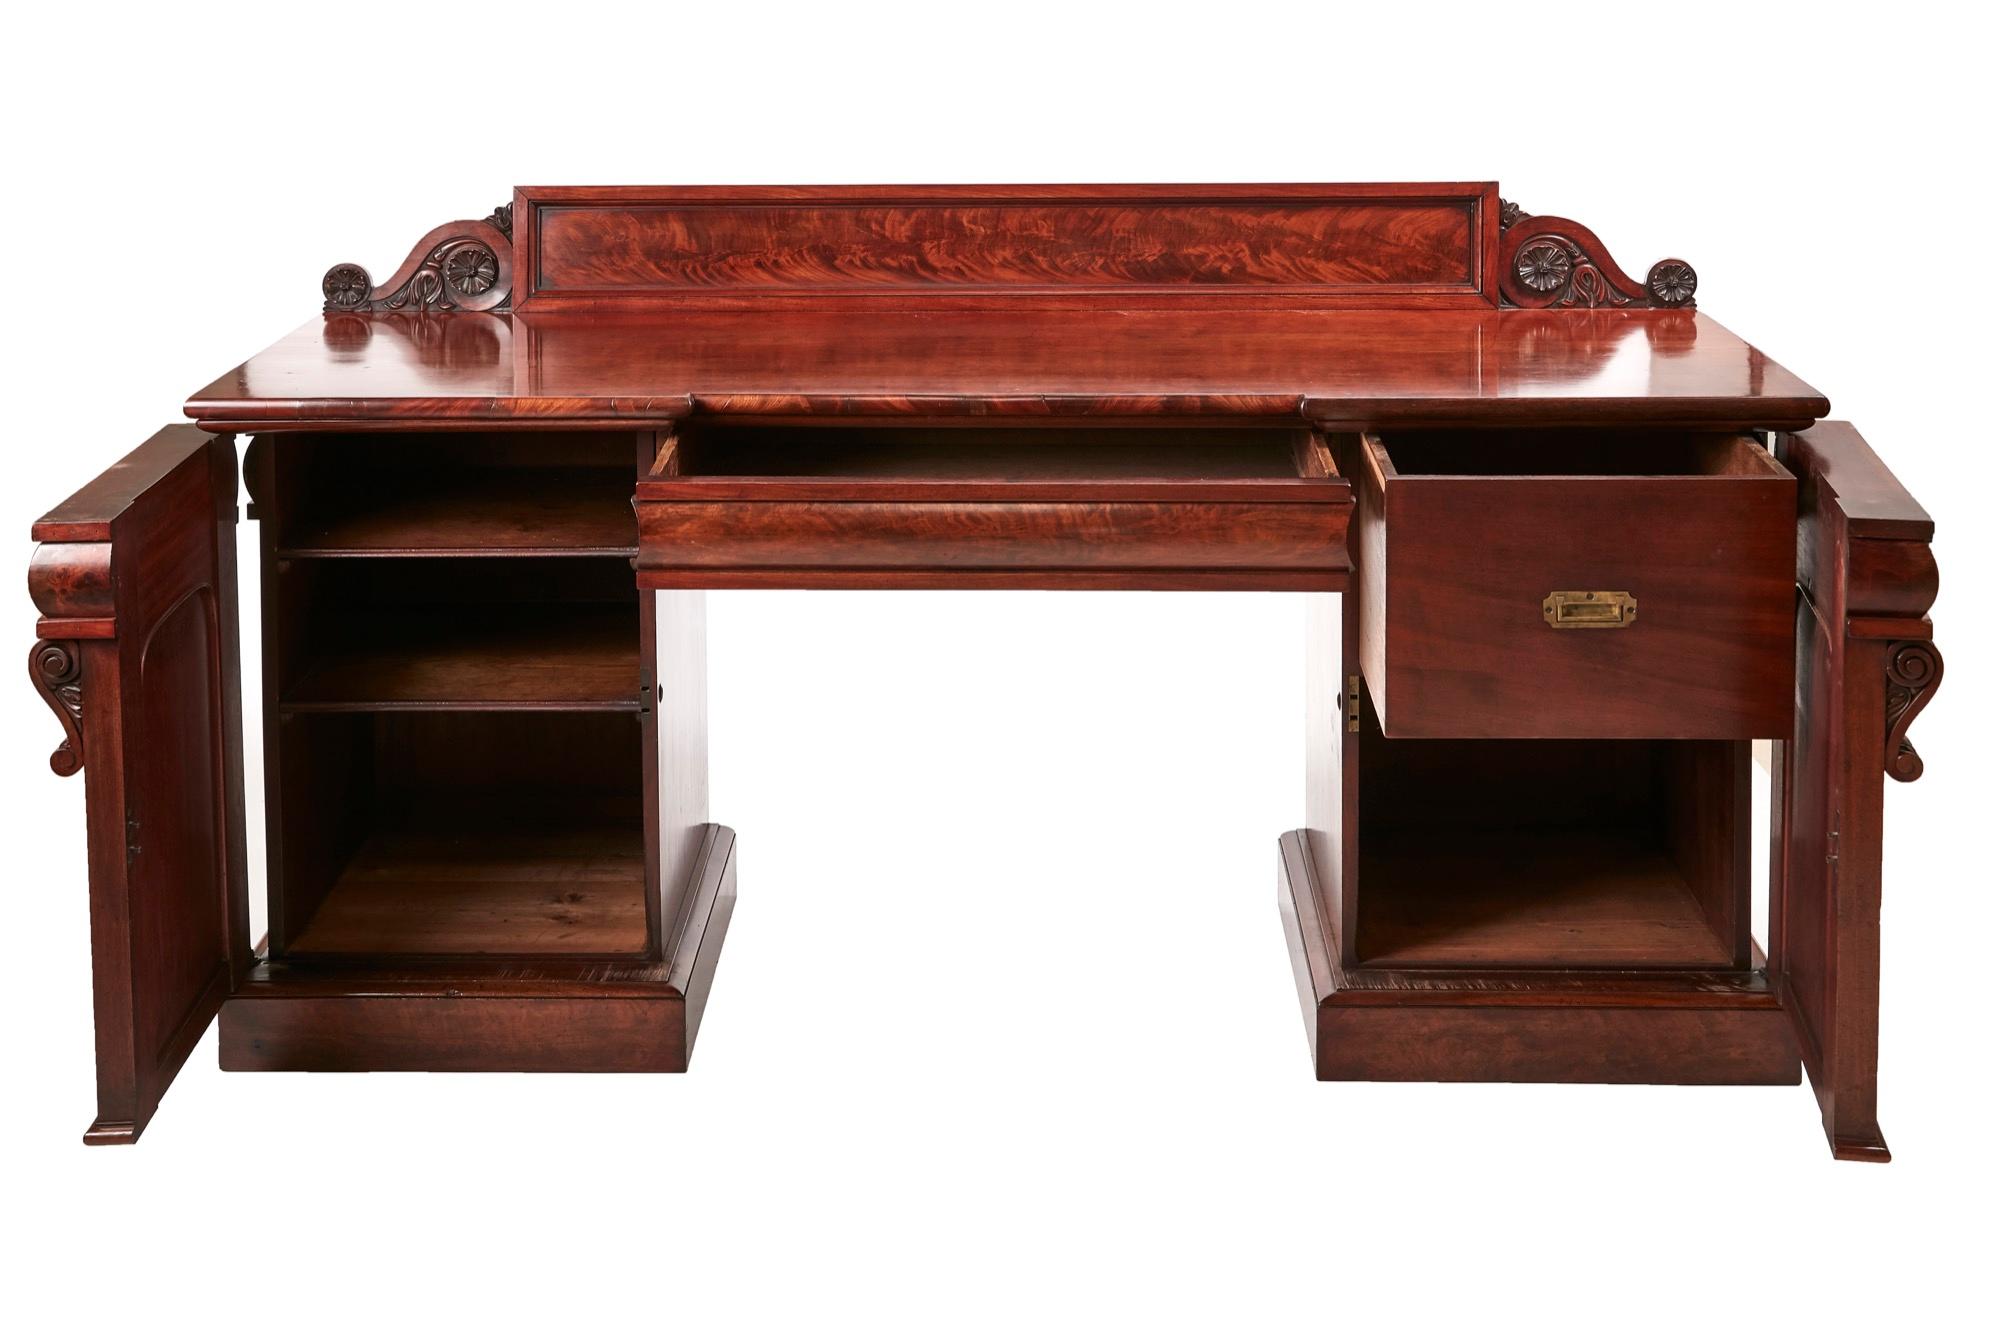 Quality William IV carved mahogany sideboard, having a lovely low carved mahogany back,quality mahogany top,one shaped drawer to the frieze, supported by two pedestals with quality carvings, fitted interior, standing on a plinth base.
Lovely color